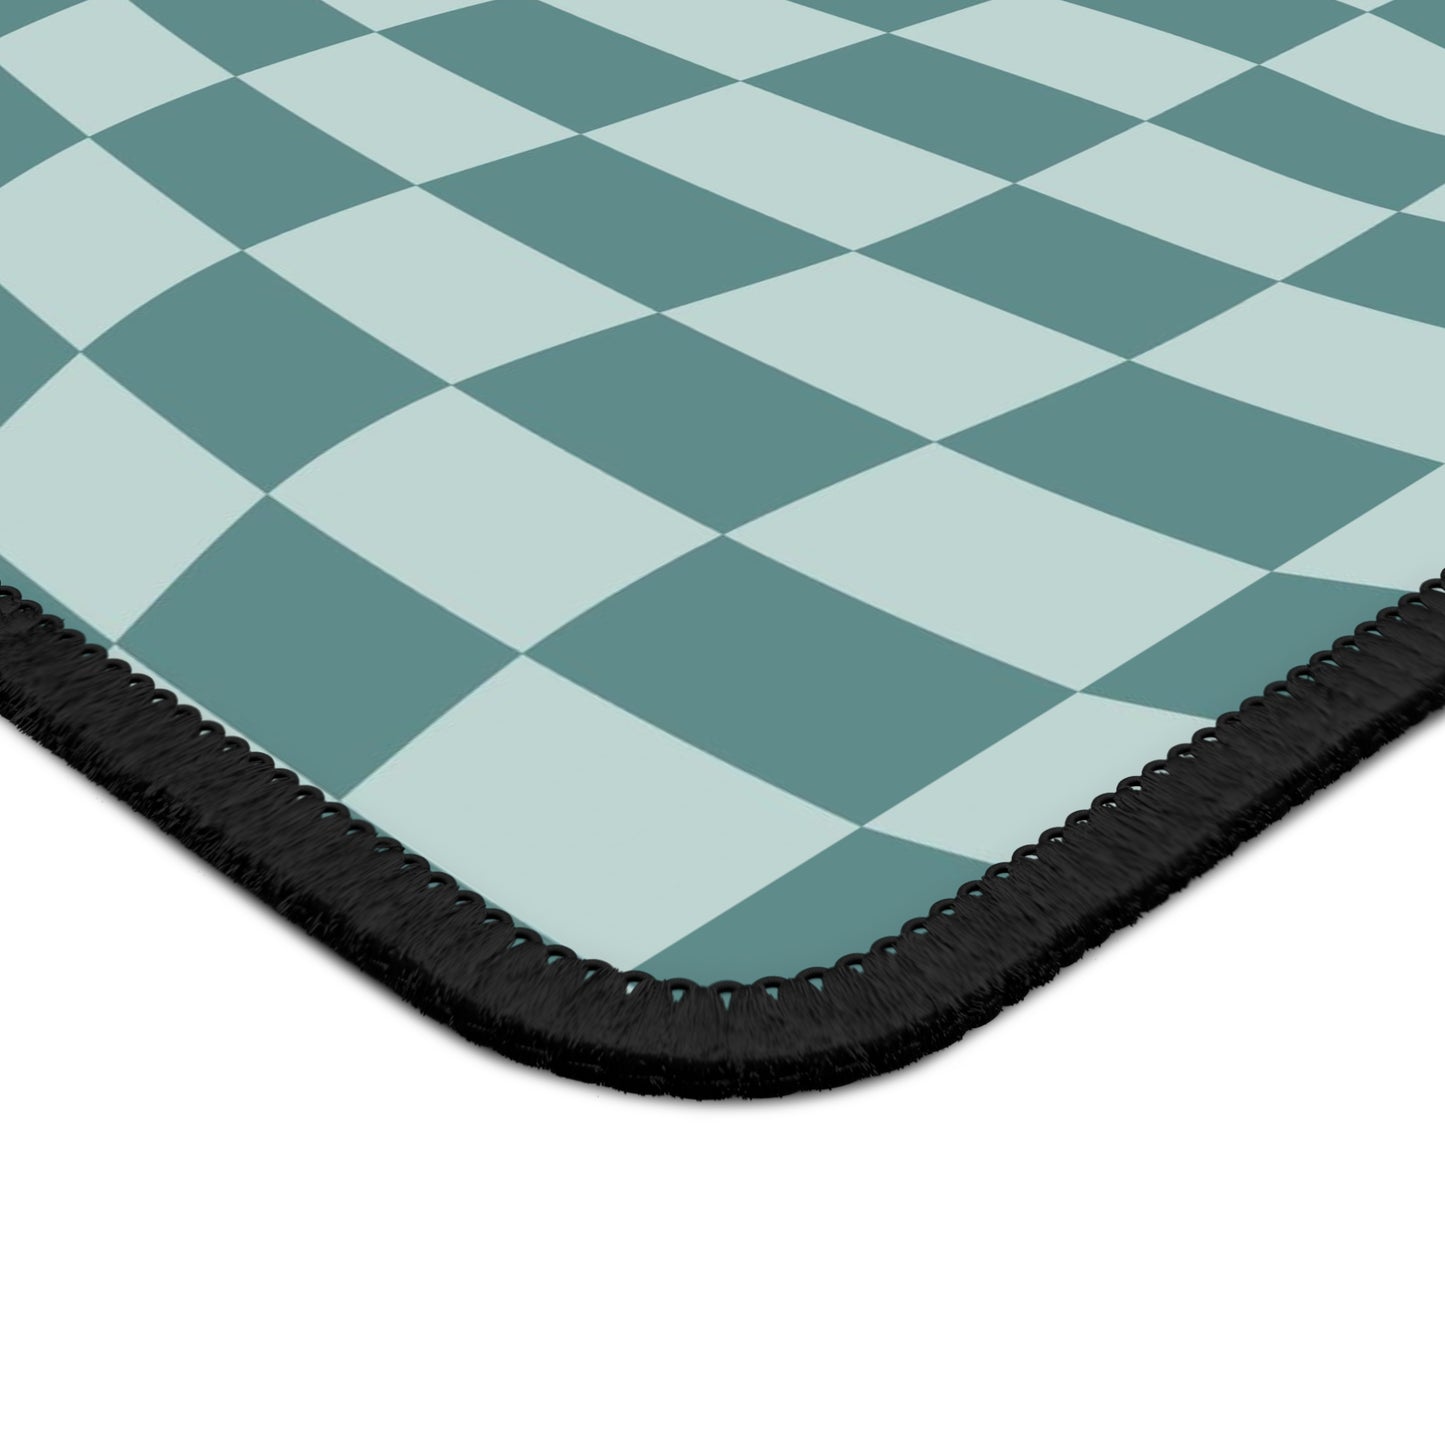 Trendy Wavy Teal Blue Checkerboard Non Slip Gaming Mouse Pad